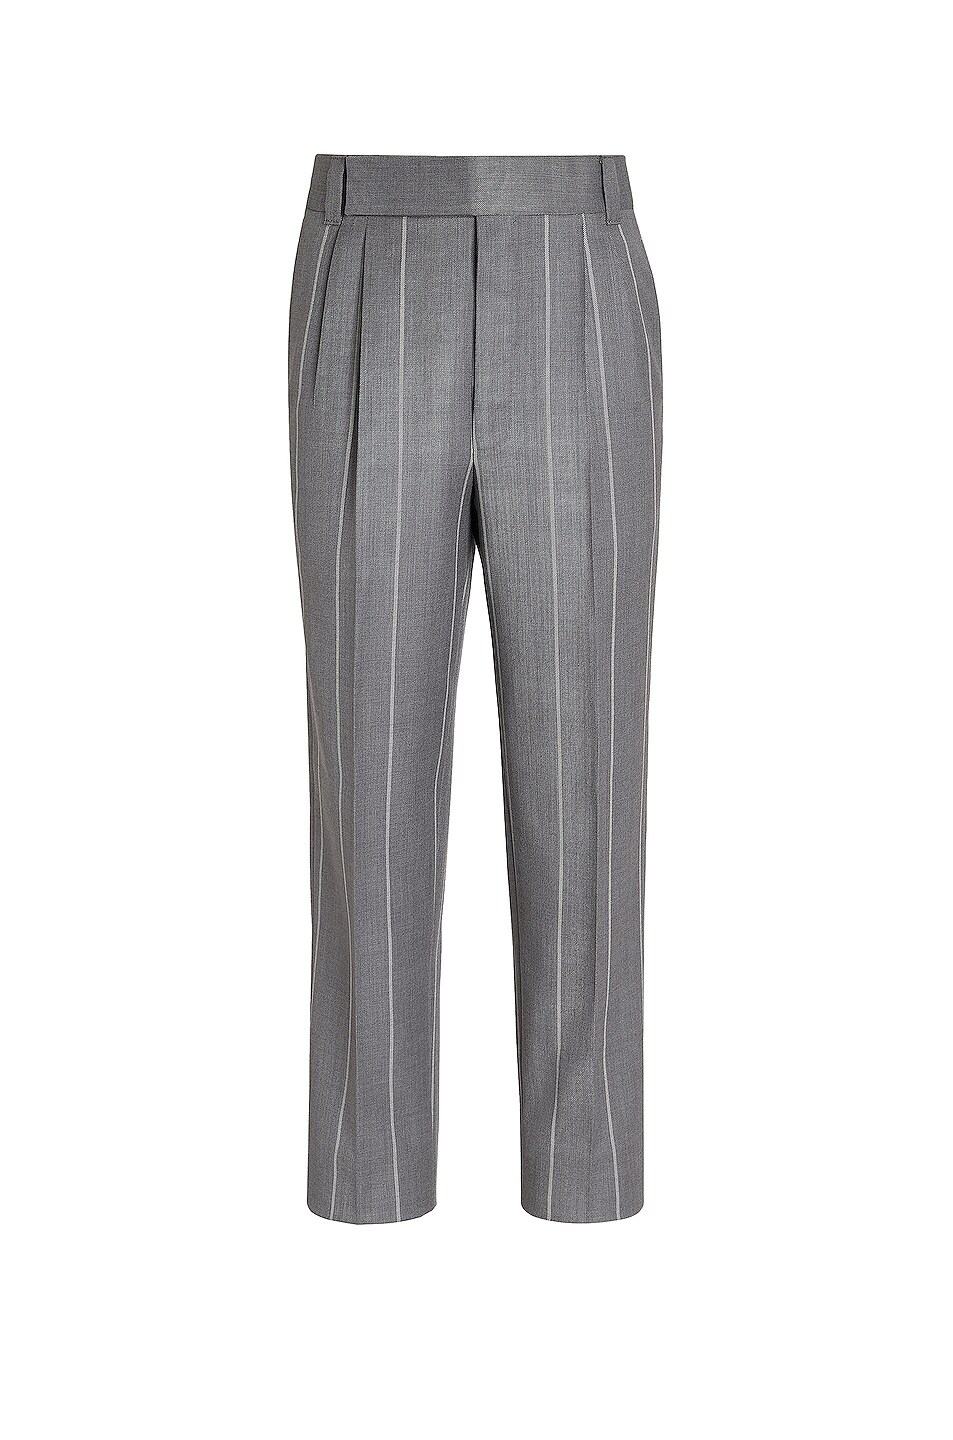 Fear of God Exclusively for Ermenegildo Zegna Double Pleat Trousers in ...